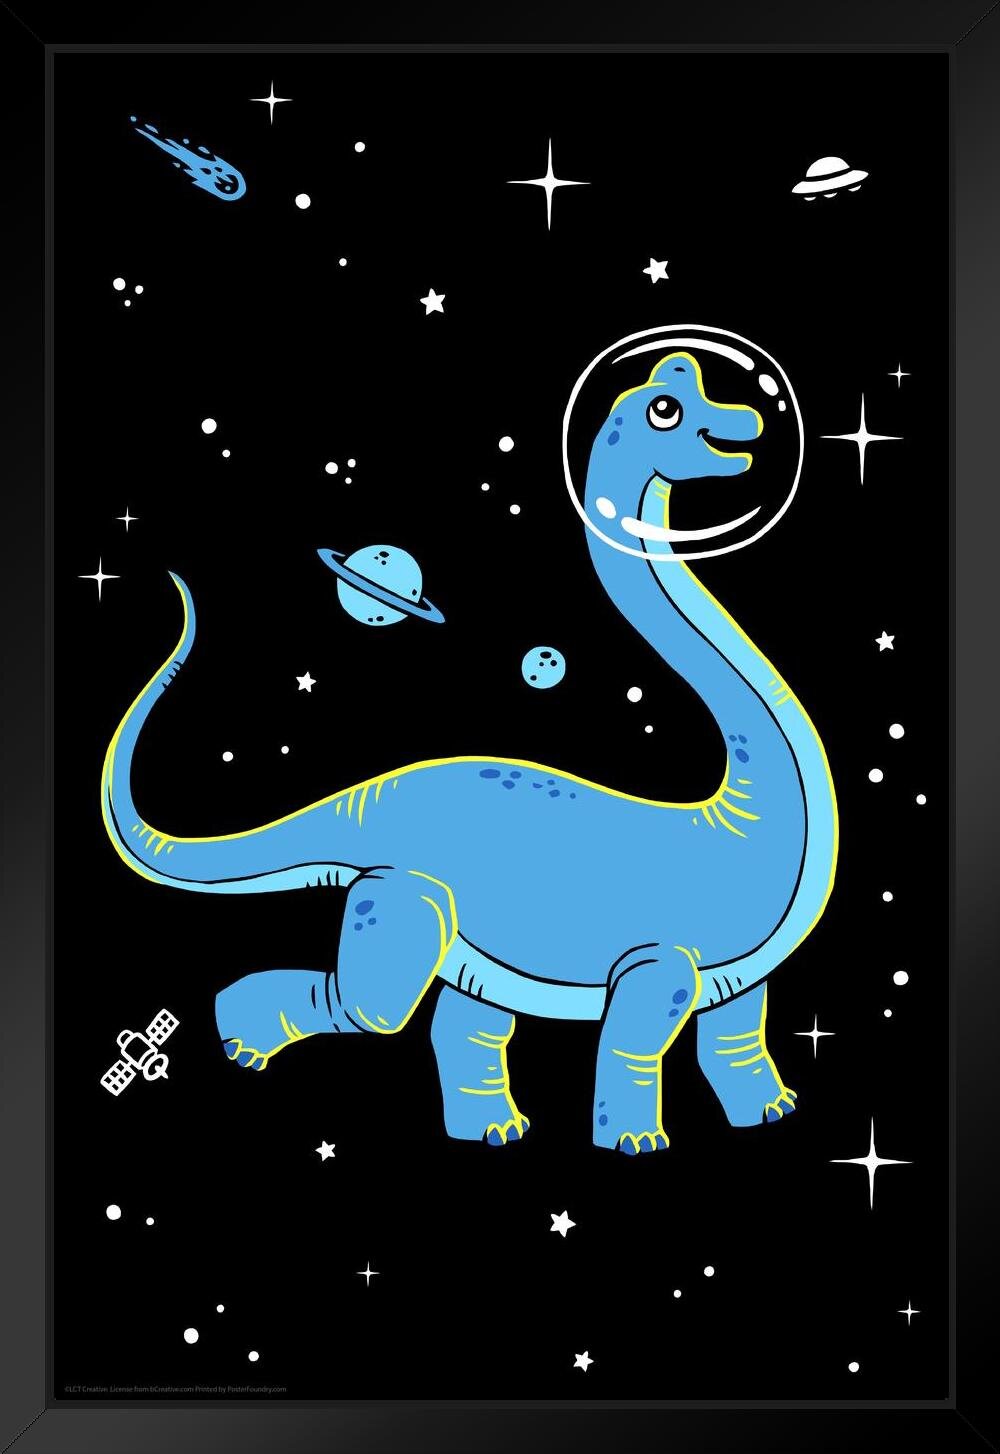 For Wall Poster Zoomie Framed In Dinos Room Prints Art Pictures Kids Space Art Wall Black Kids Framed Brachiosaurus Dinosaur Space Science Dinosaur 14x20 Dinosaur For Wall Meteor Dinosaur Wood Decor Poster